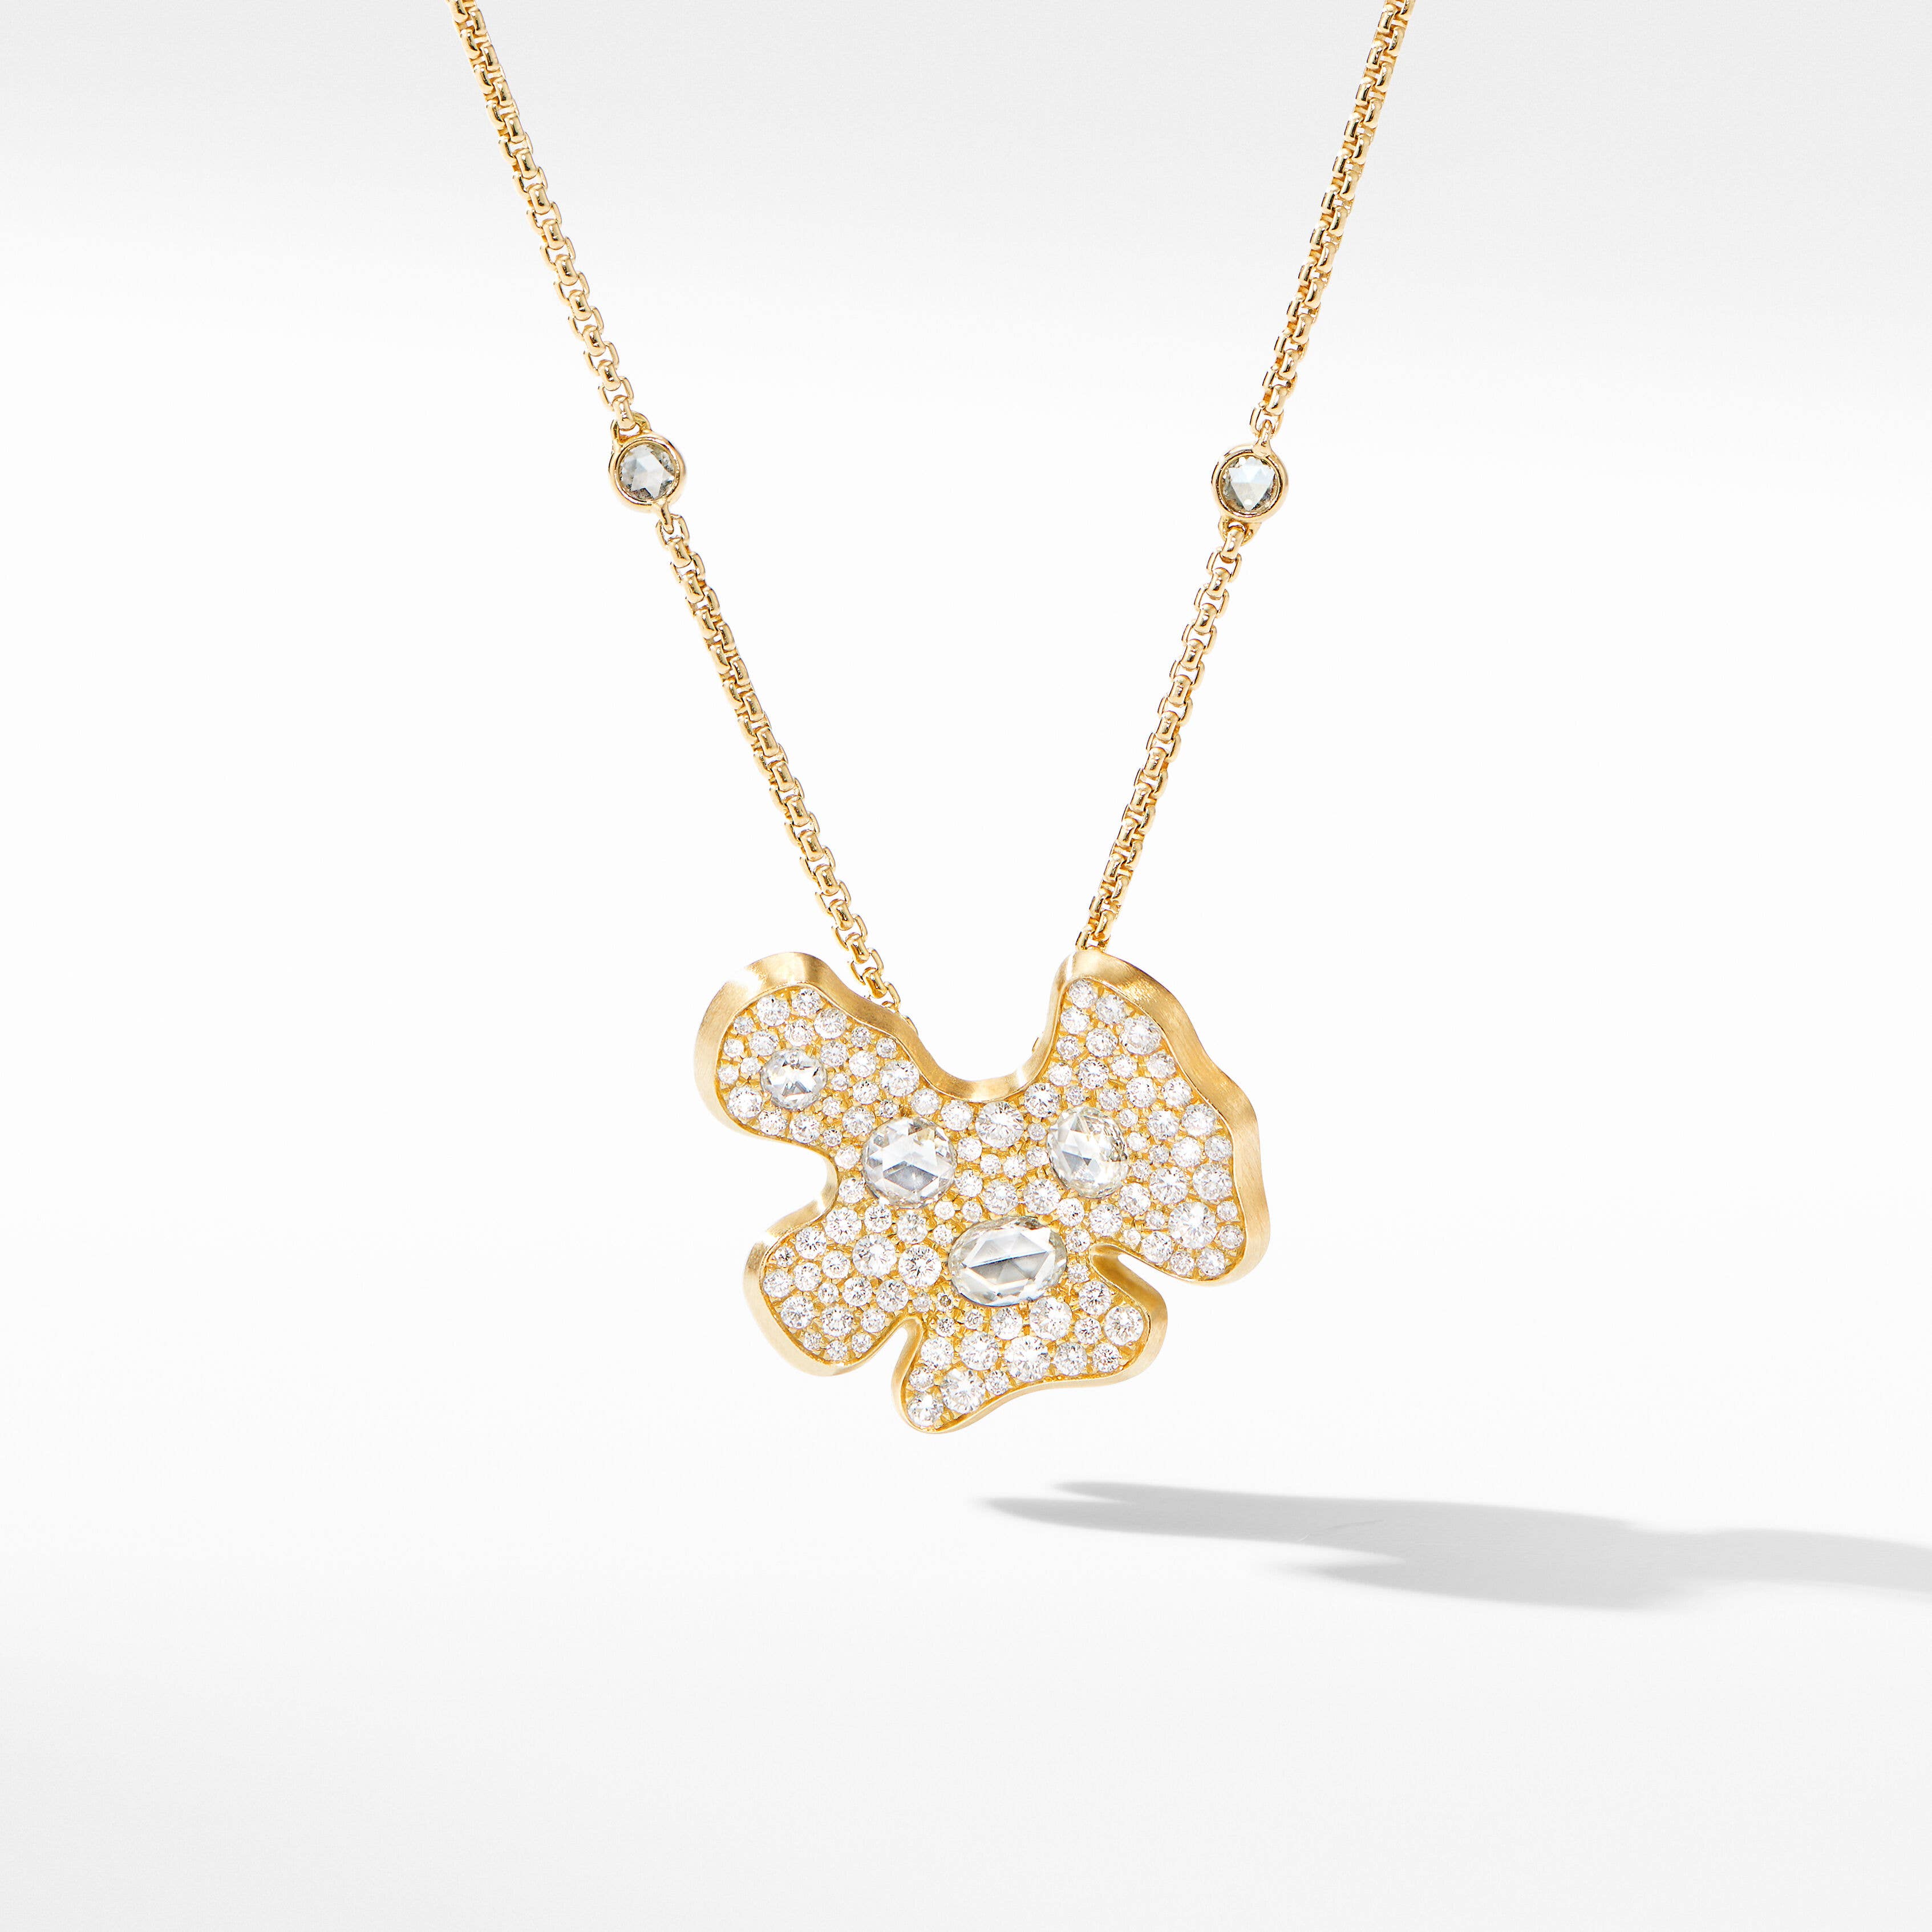 Day Petals Pendant Necklace in Yellow Gold with Diamonds